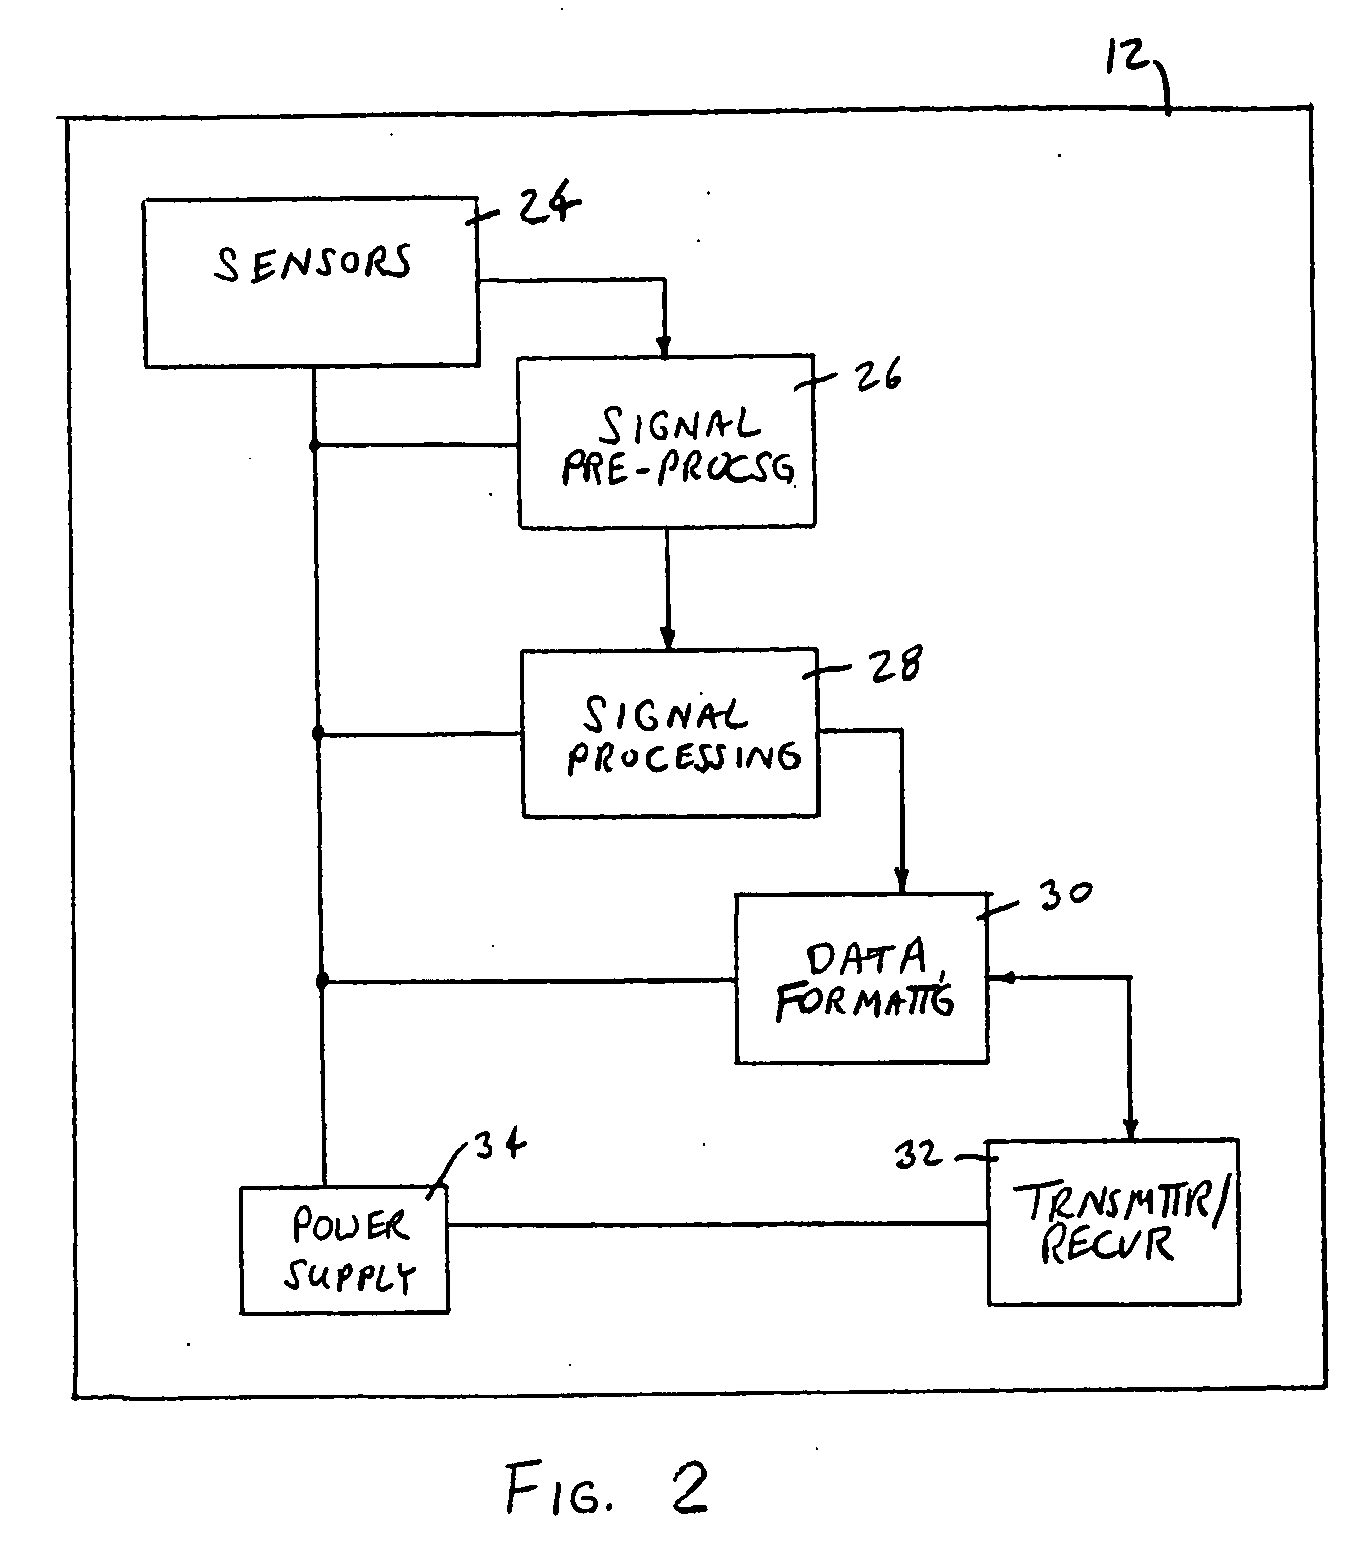 Apparatus and method for evaluating a hypertonic condition